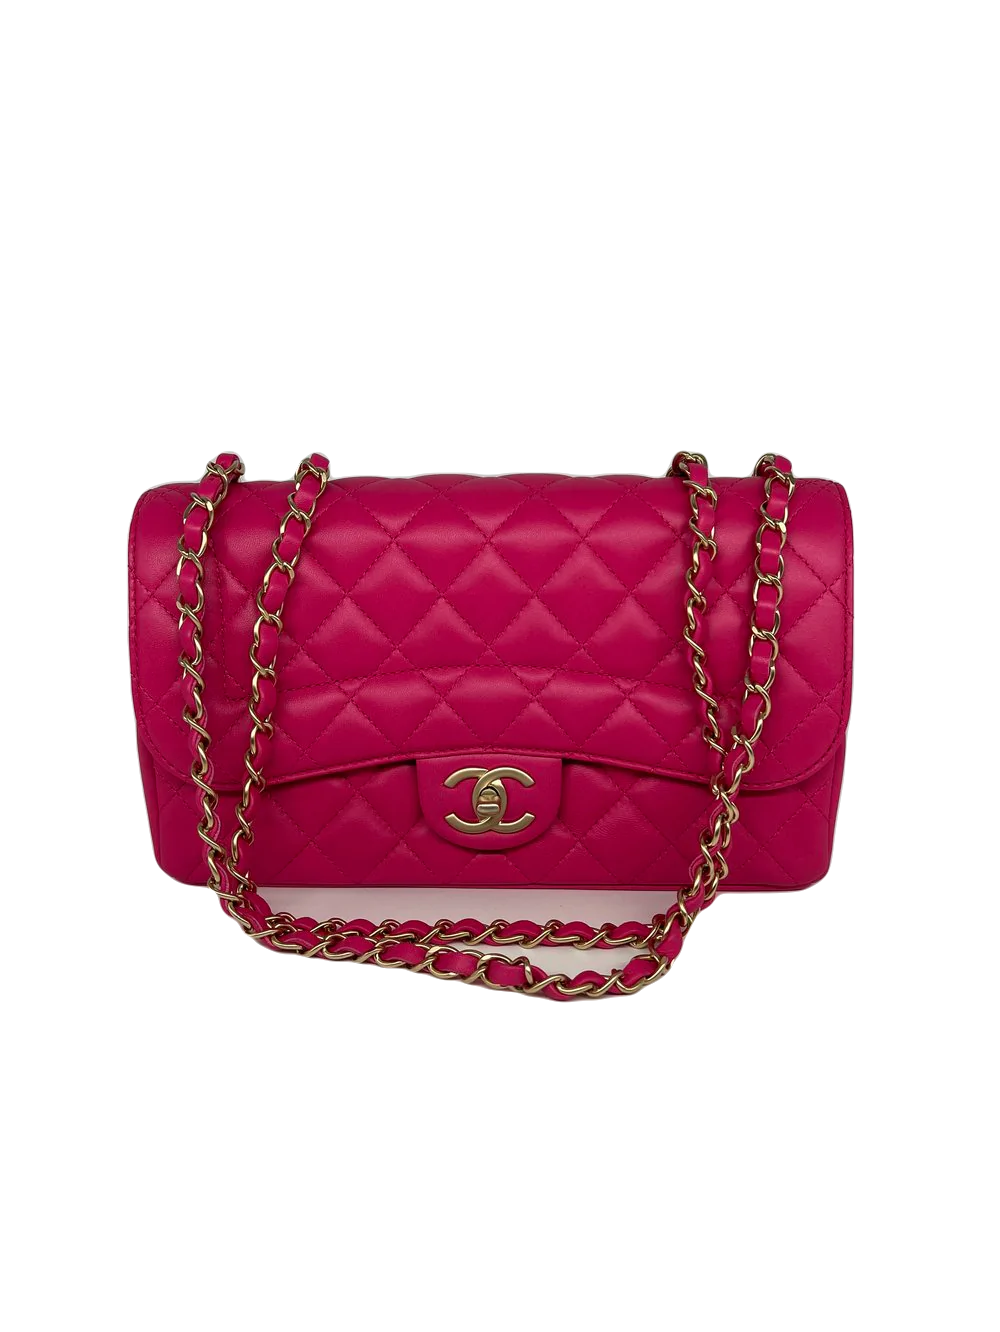 Chanel 2015 Diana Flap Bag Pink GHW - SOLD